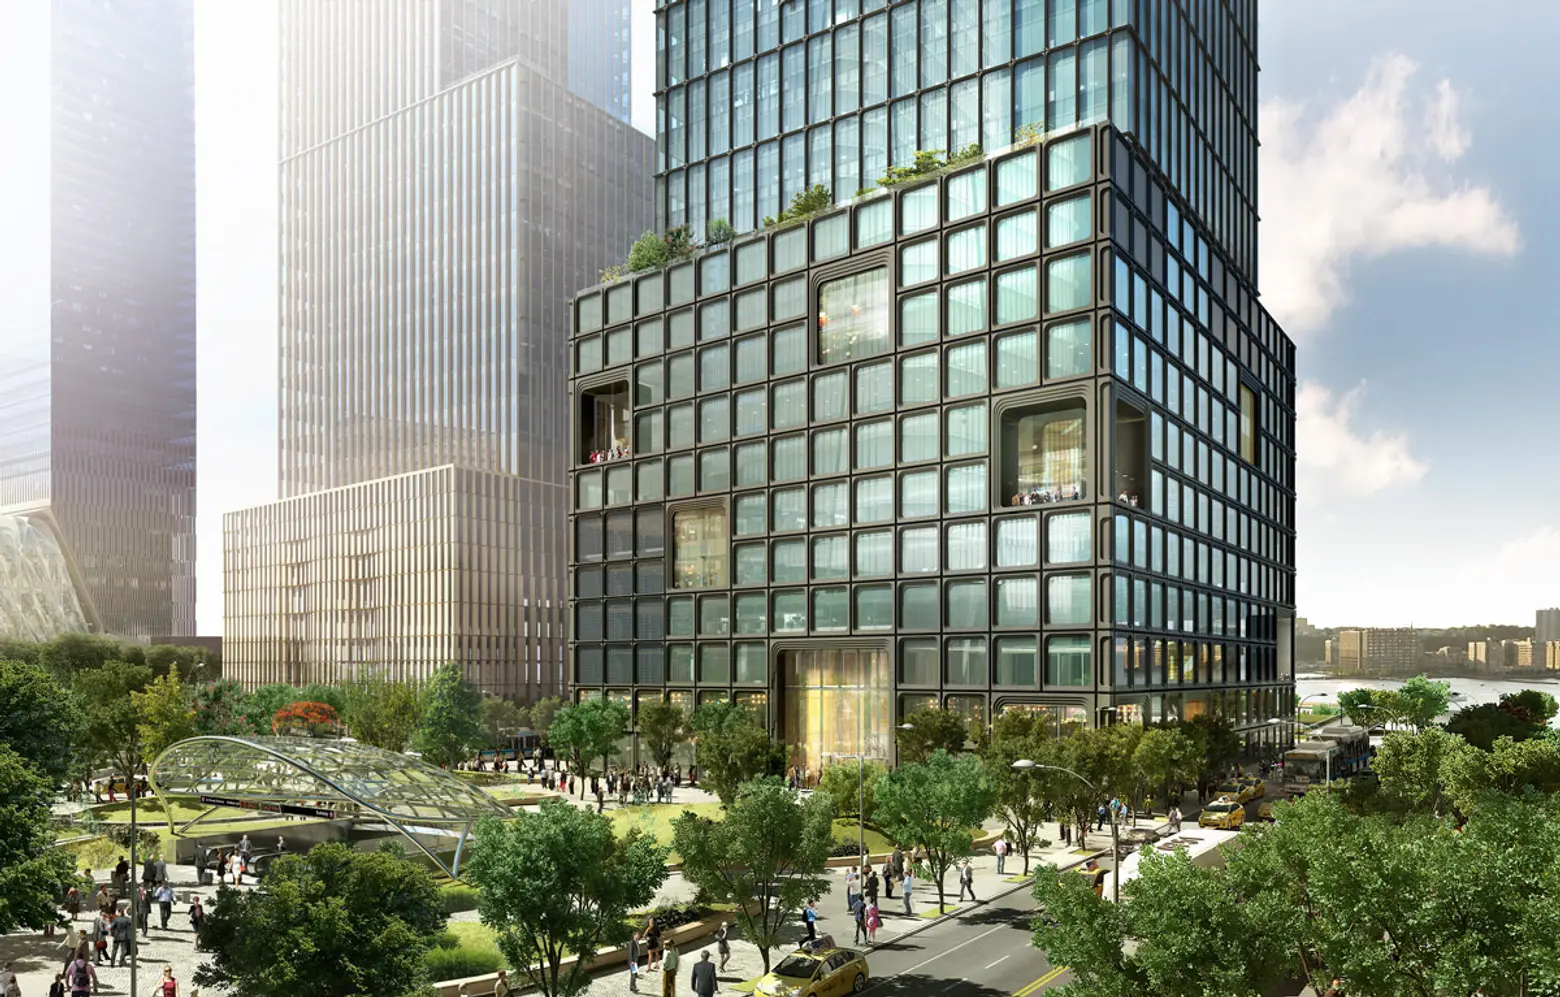 Apple in talks for office and retail space at Hudson Yards